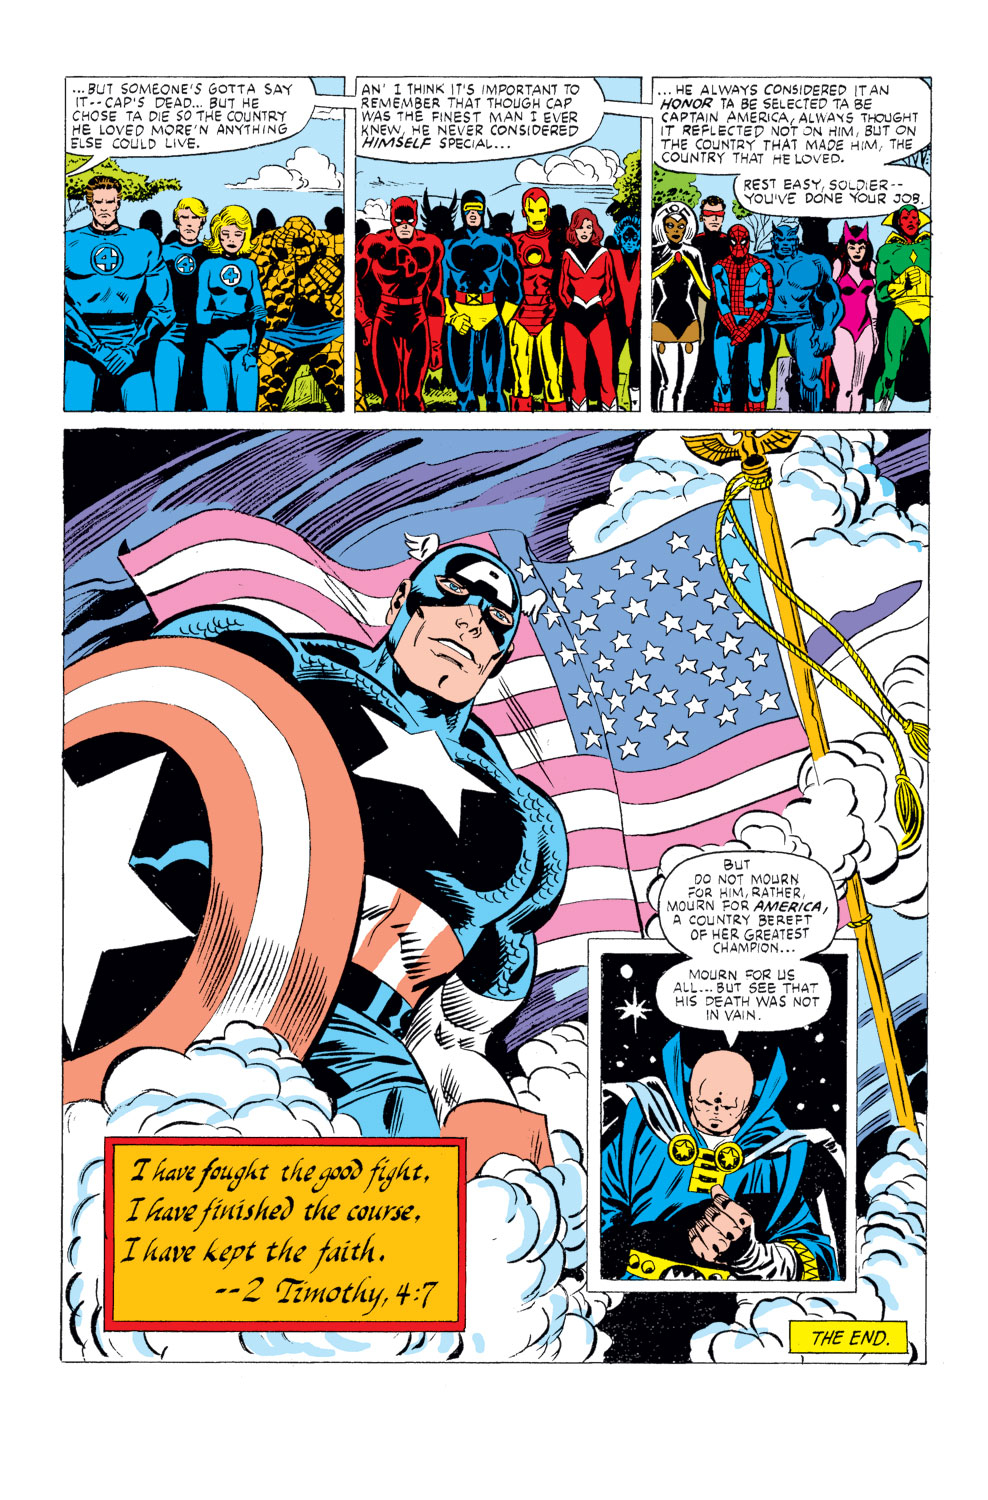 What If? (1977) issue 26 - Captain America had been elected president - Page 21